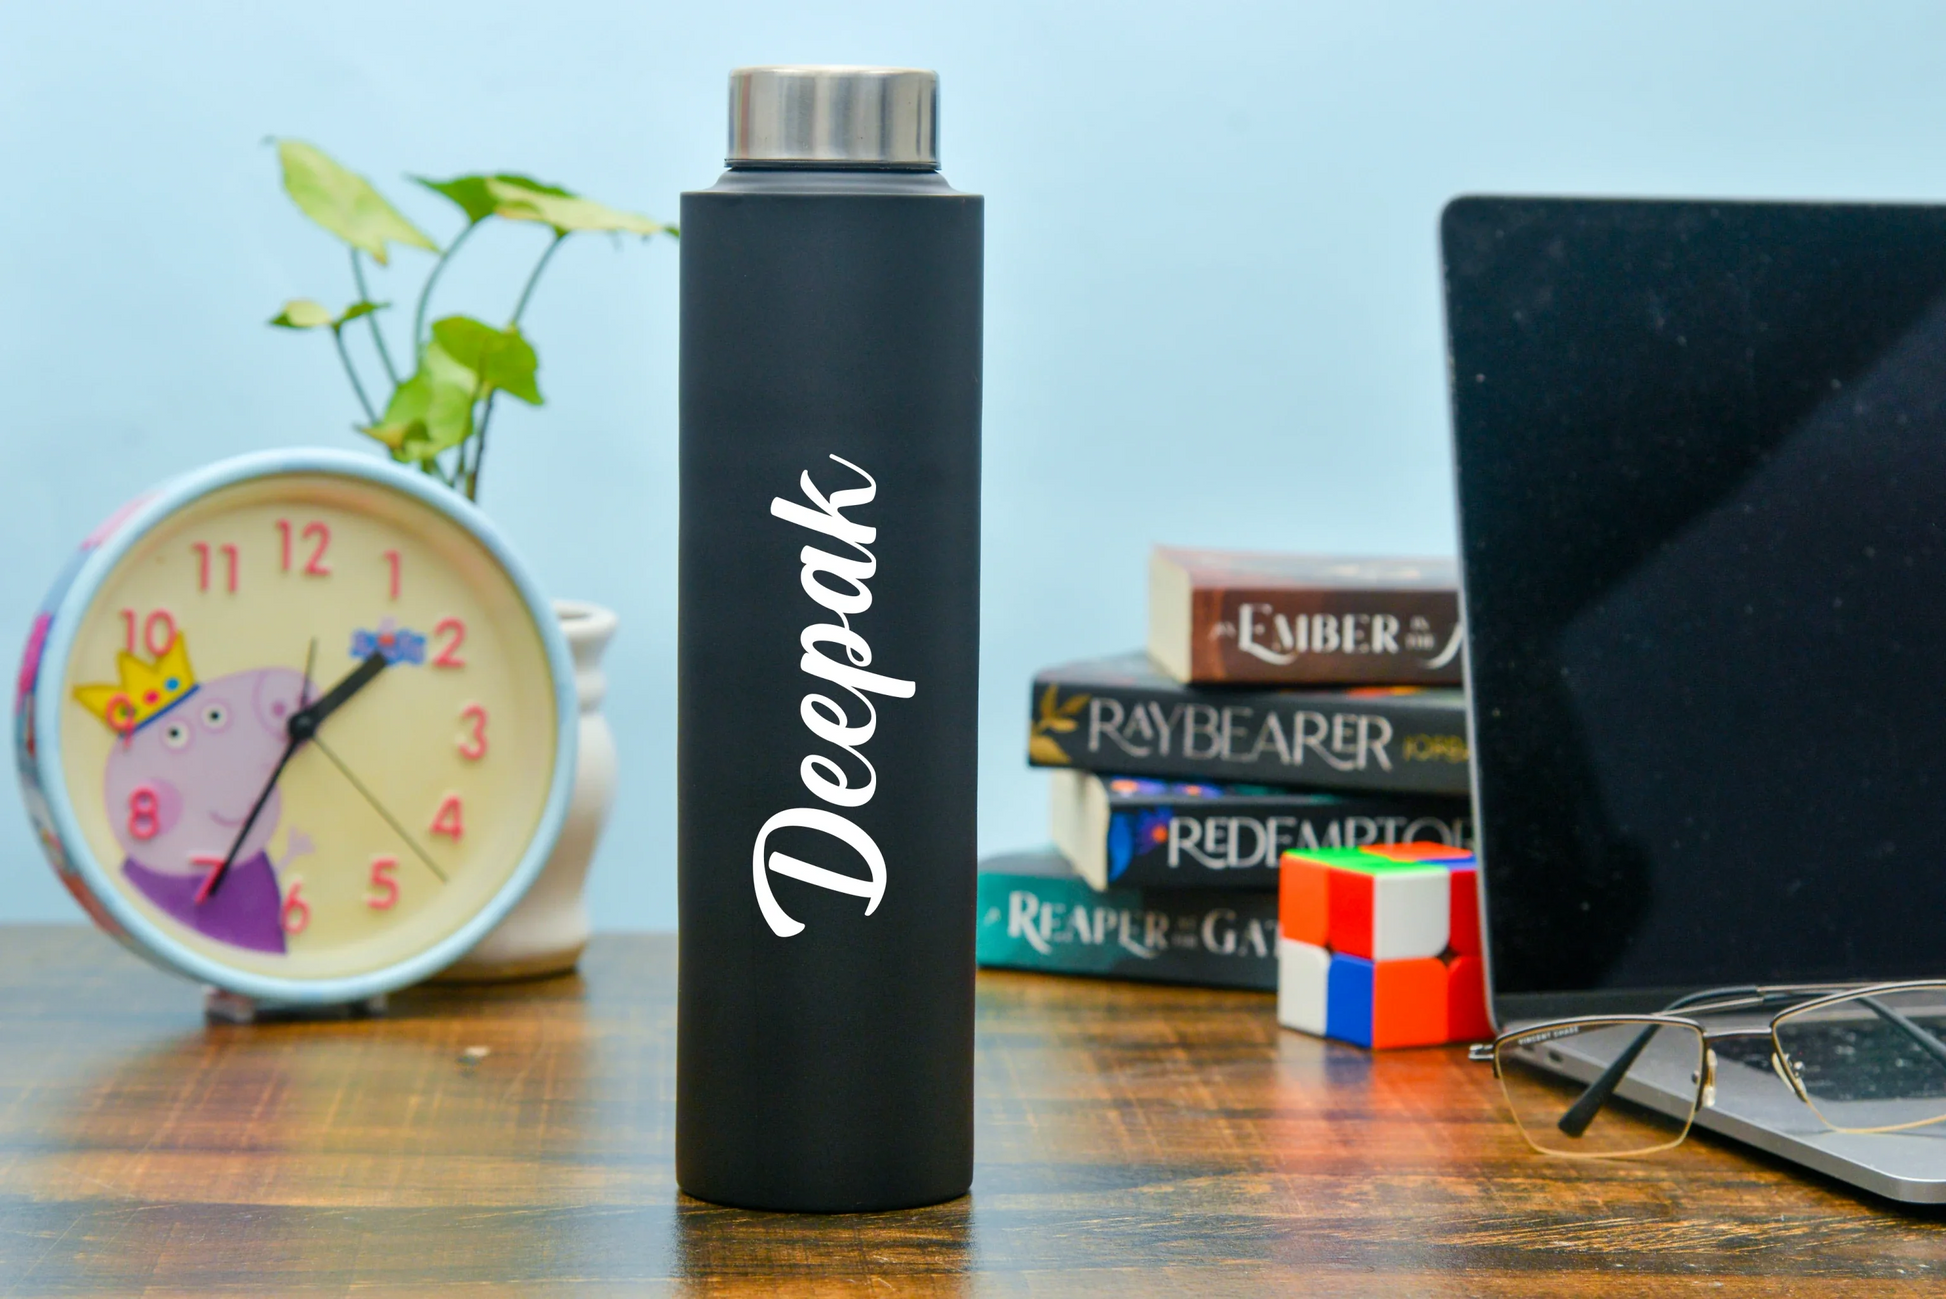 Keep your drinks hot or cold for hours with our double-walled stainless steel bottle. Personalize it with your name or initials for a one-of-a-kind accessory.